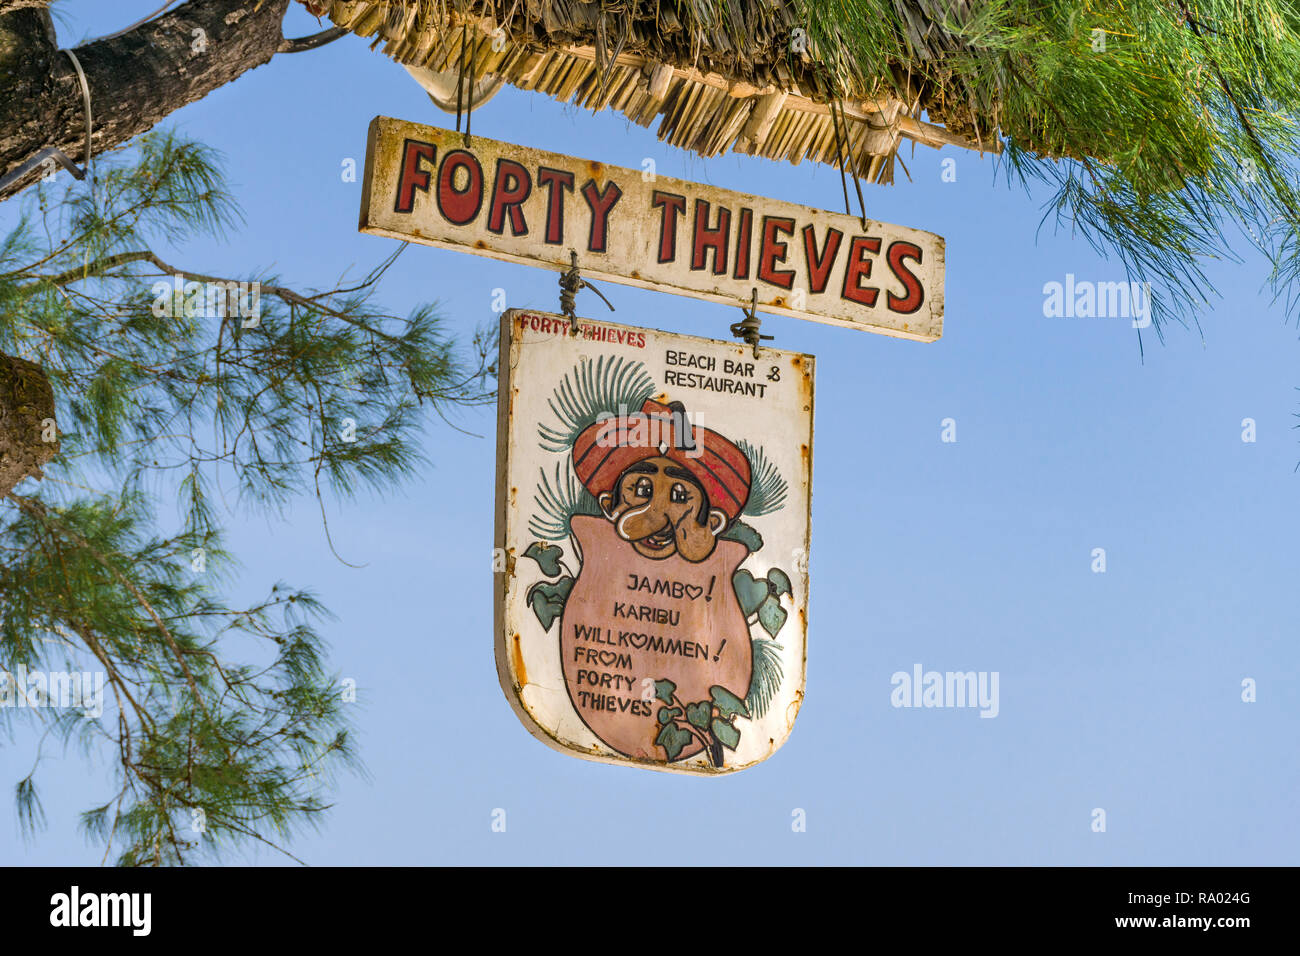 A sign for the Forty Thieves beach bar and restaurant hangs from a tree in the shade on a sunny blue sky day, Diani, Kenya Stock Photo